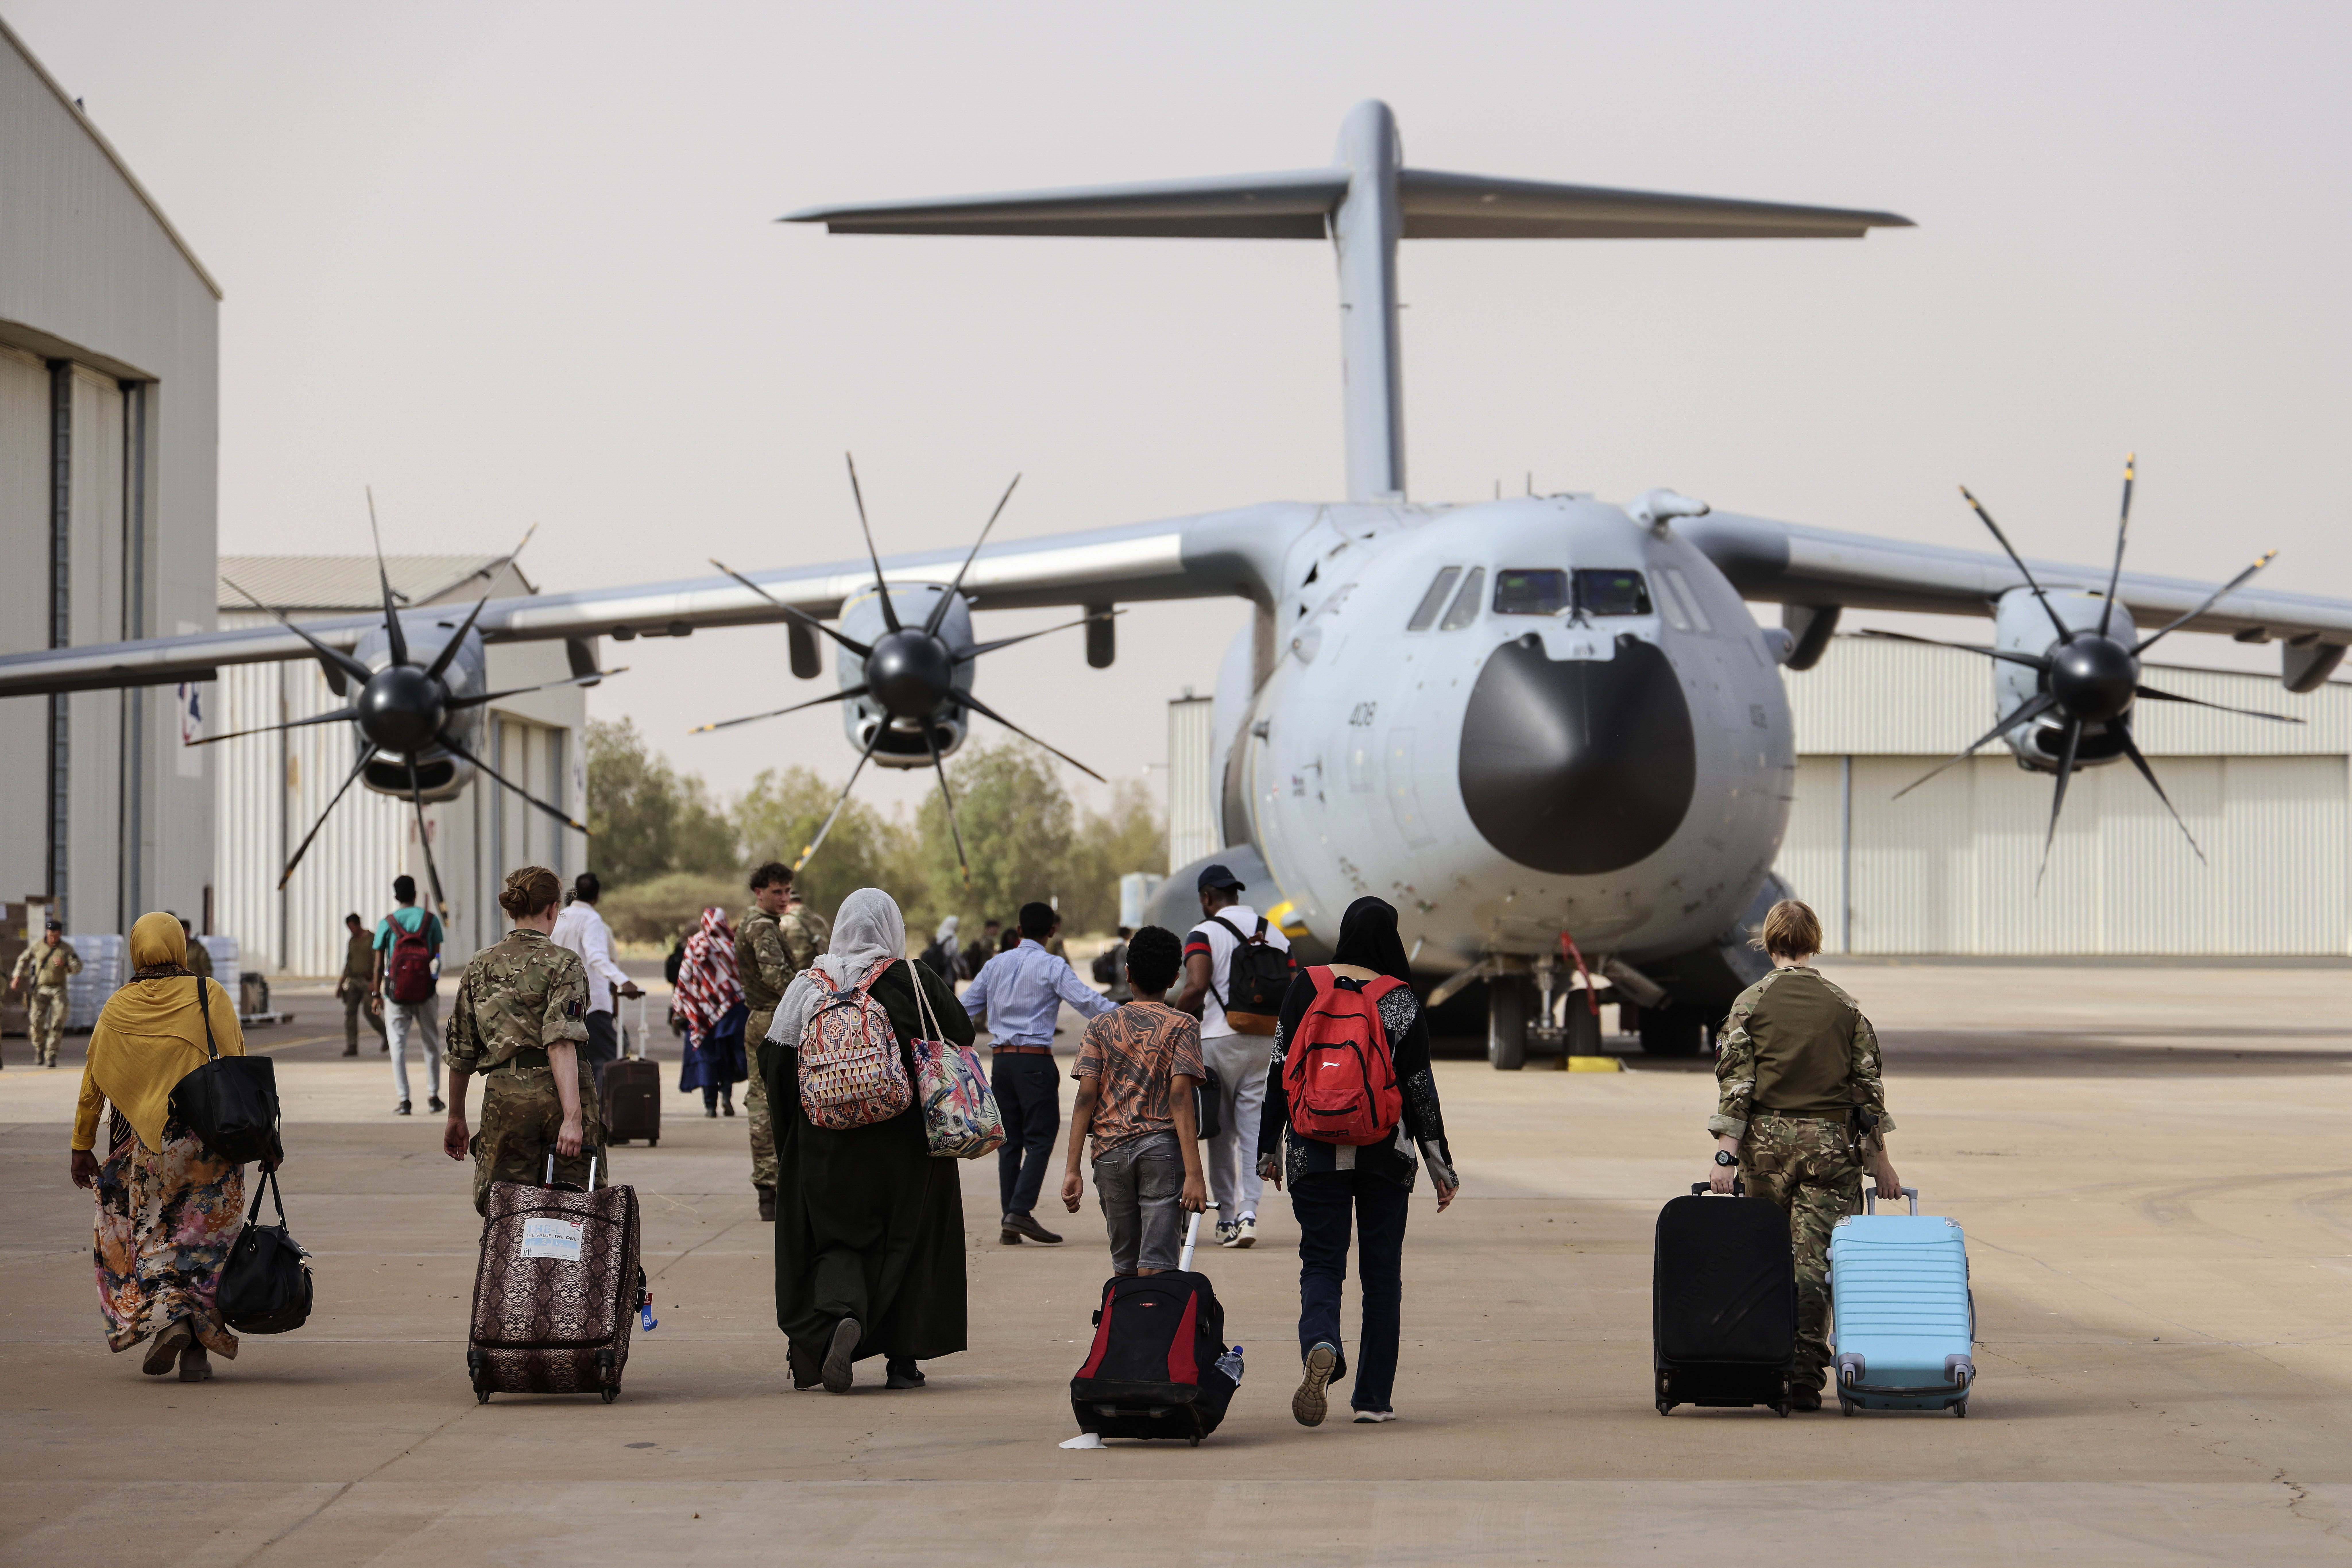 The UK has repatriated close to 2,200 people from Sudan, according to government figures